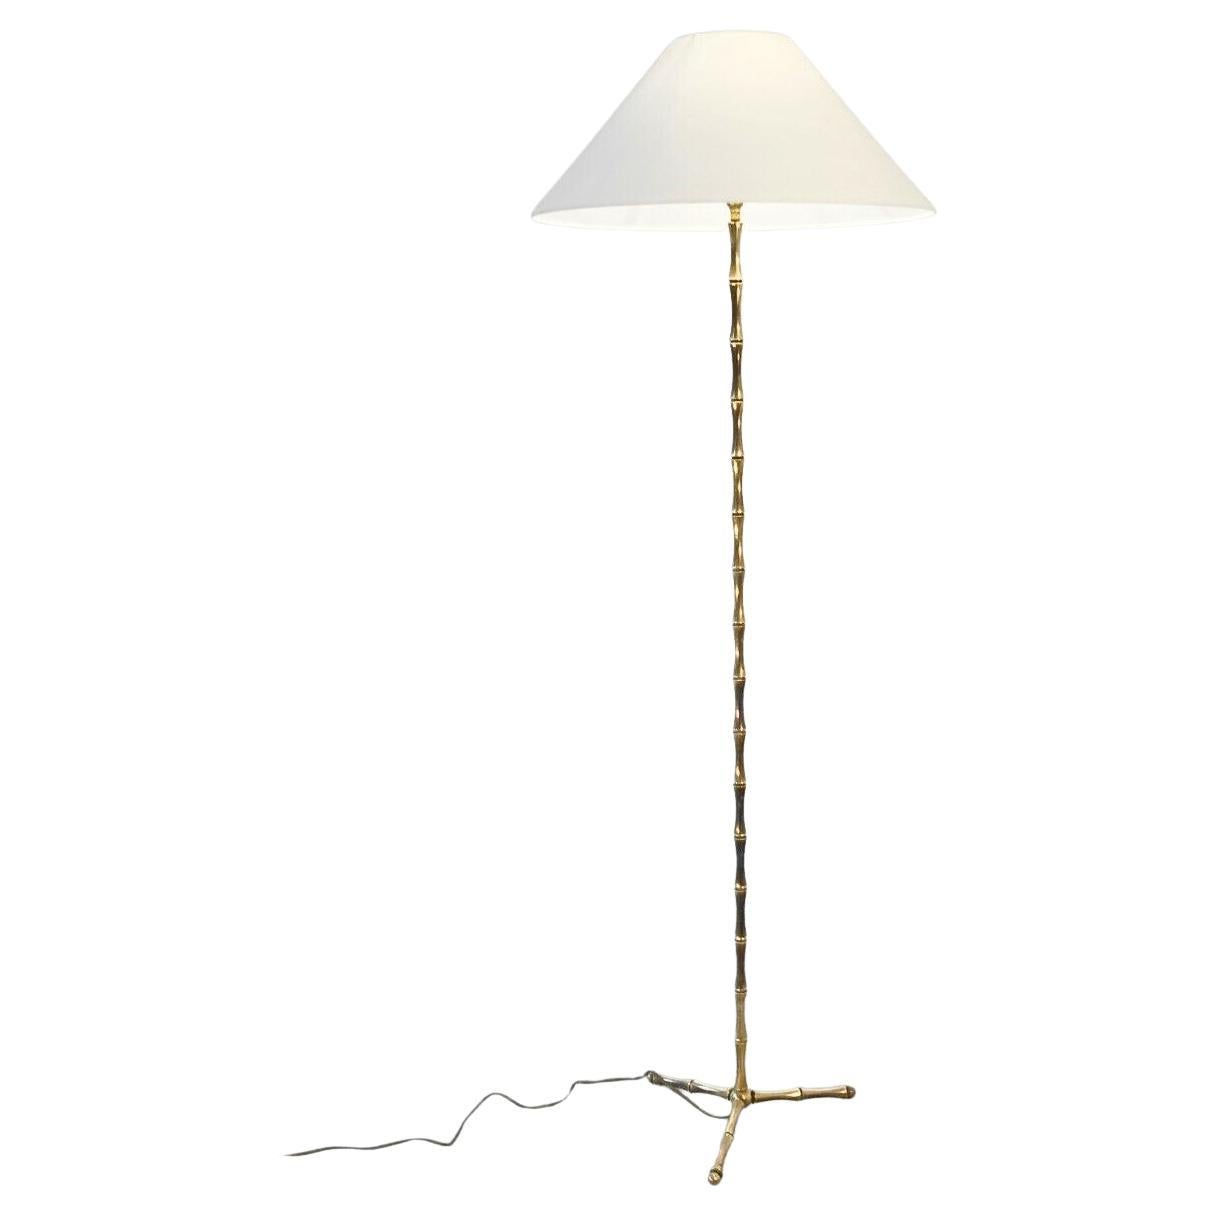 A SHABBY-CHIC NEO-CLASSIC "Bamboo" FLOOR LAMP by MAISON BAGUES, France 1960